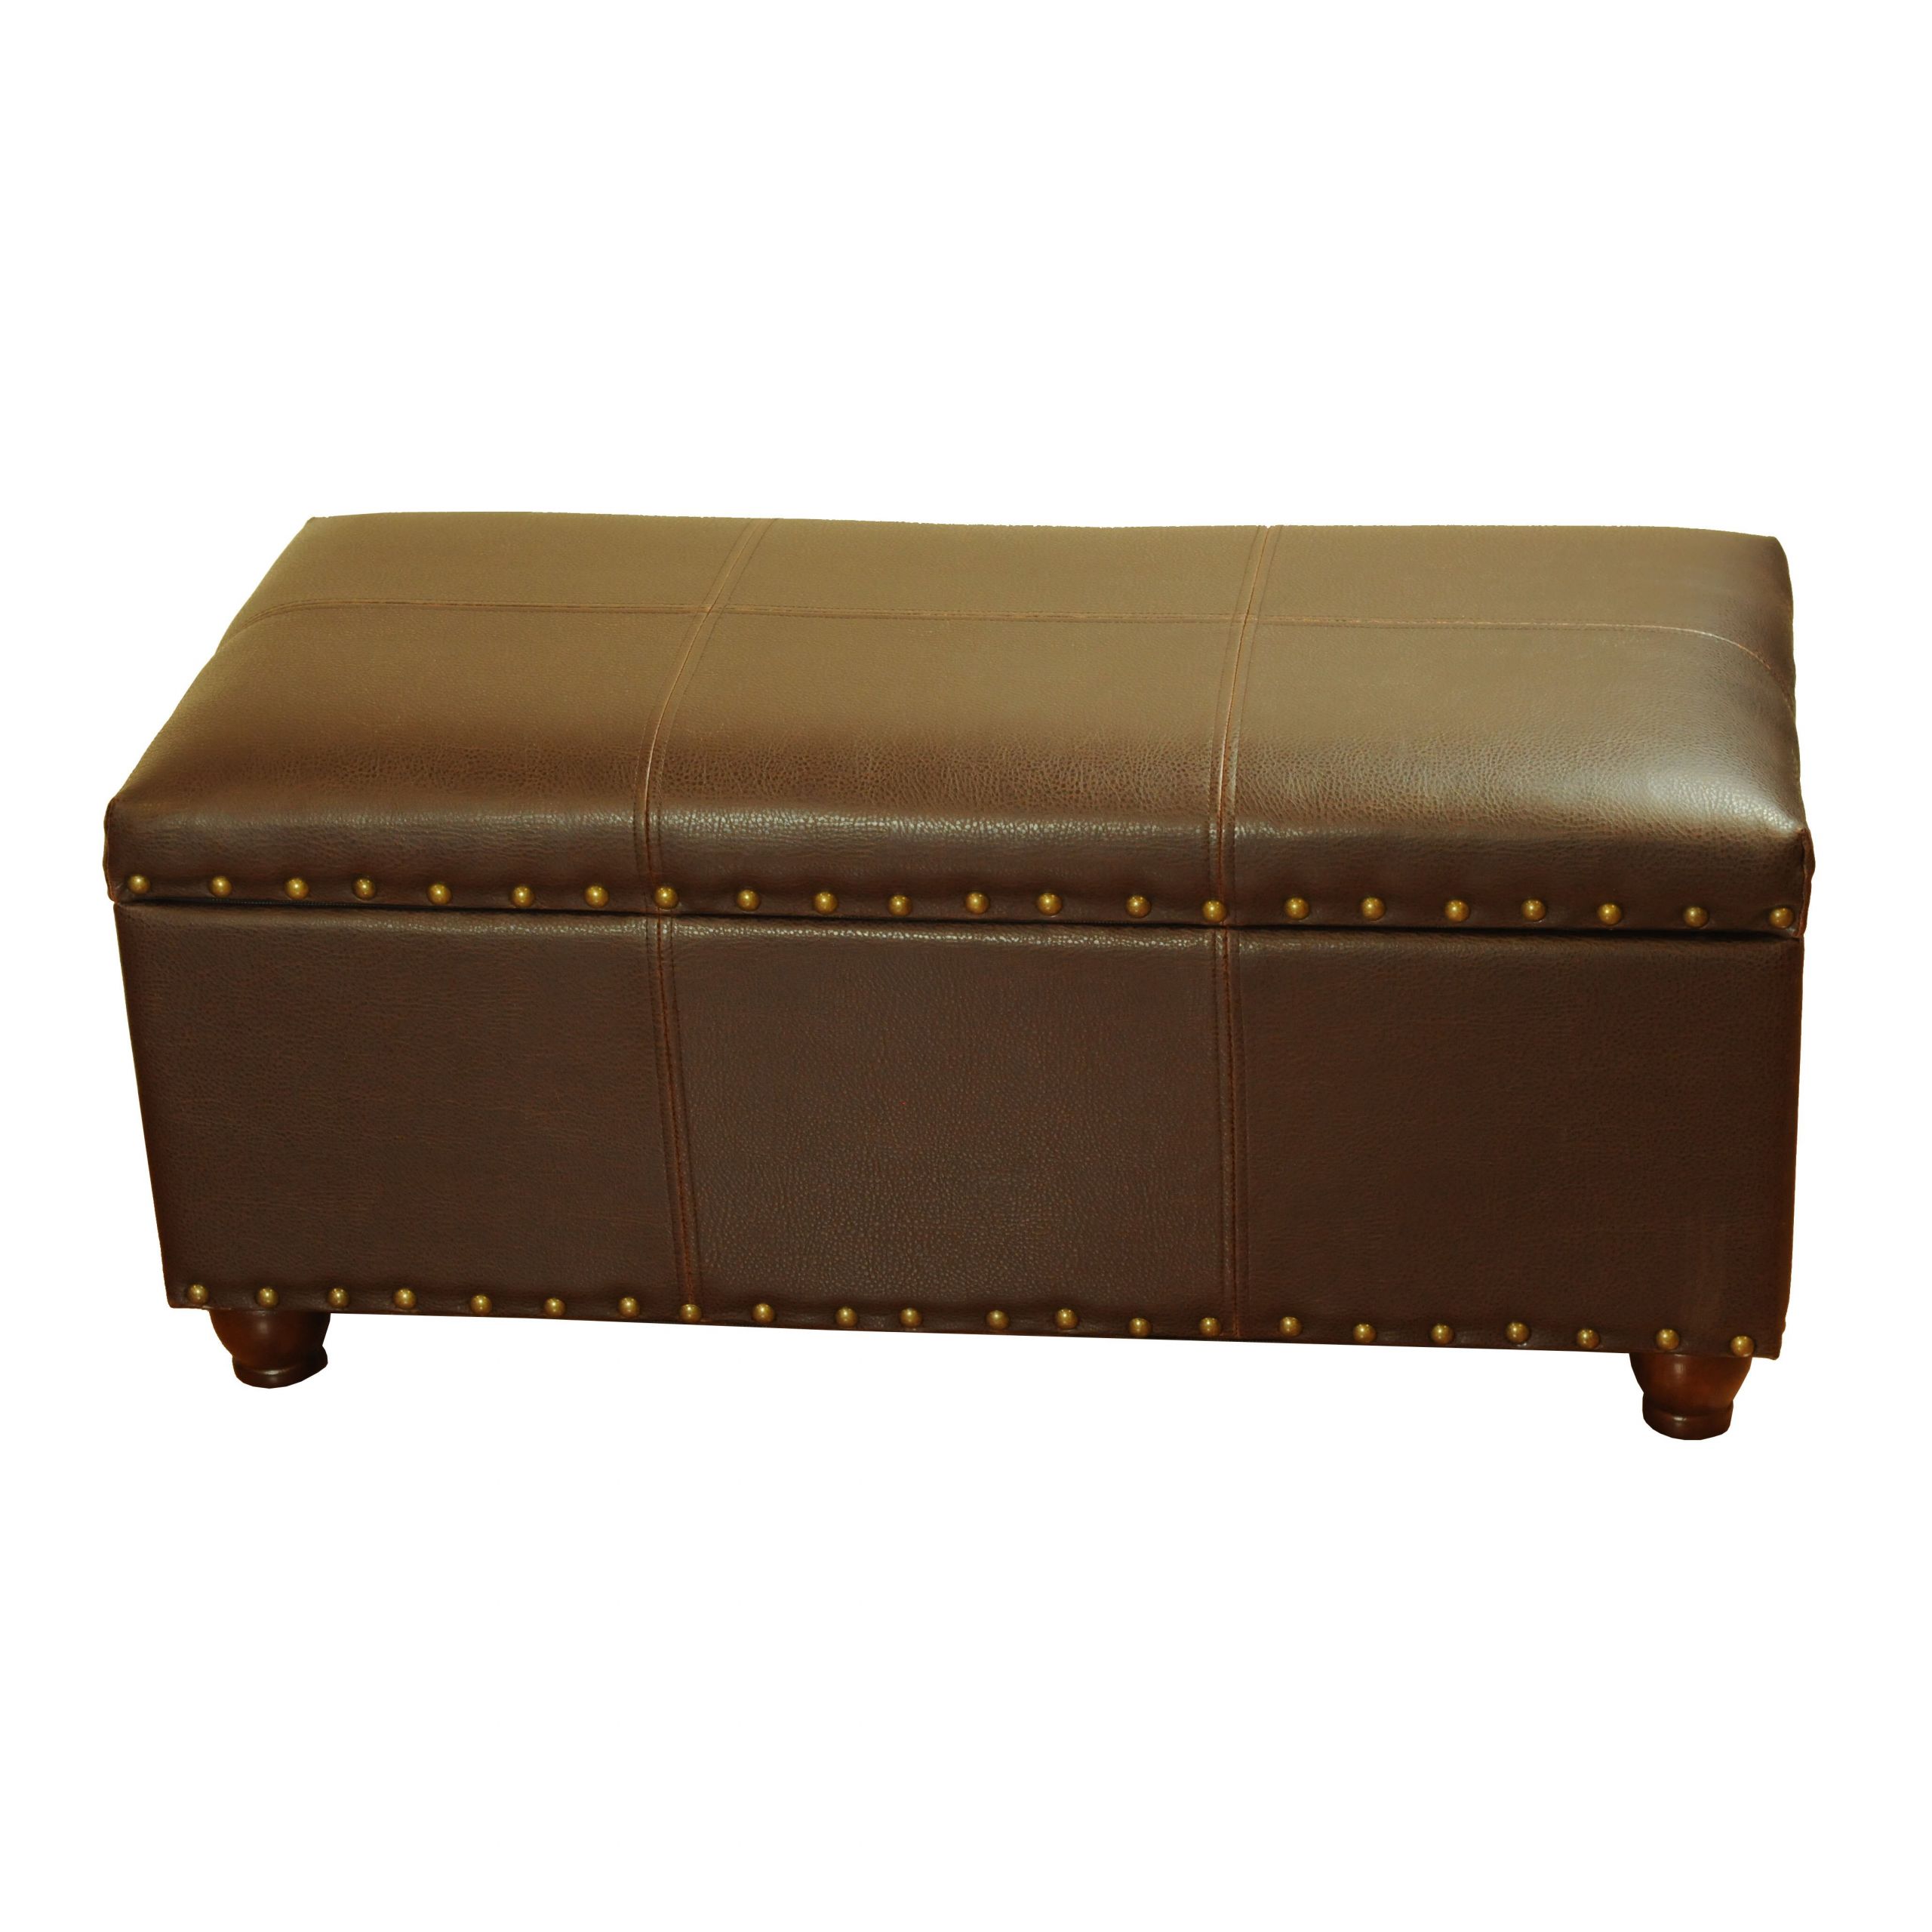 Leather Storage Bench
 HomePop Faux Leather Storage Bedroom Bench & Reviews